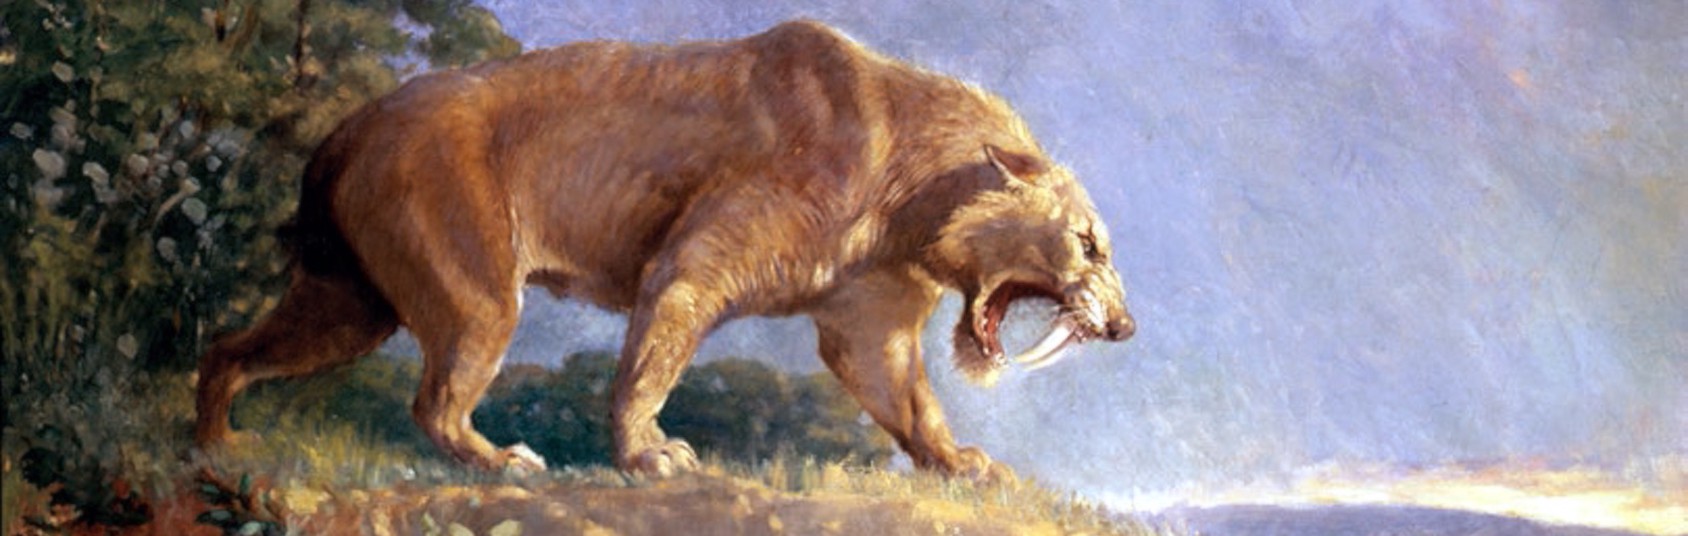 draw of sabre-toothed cat